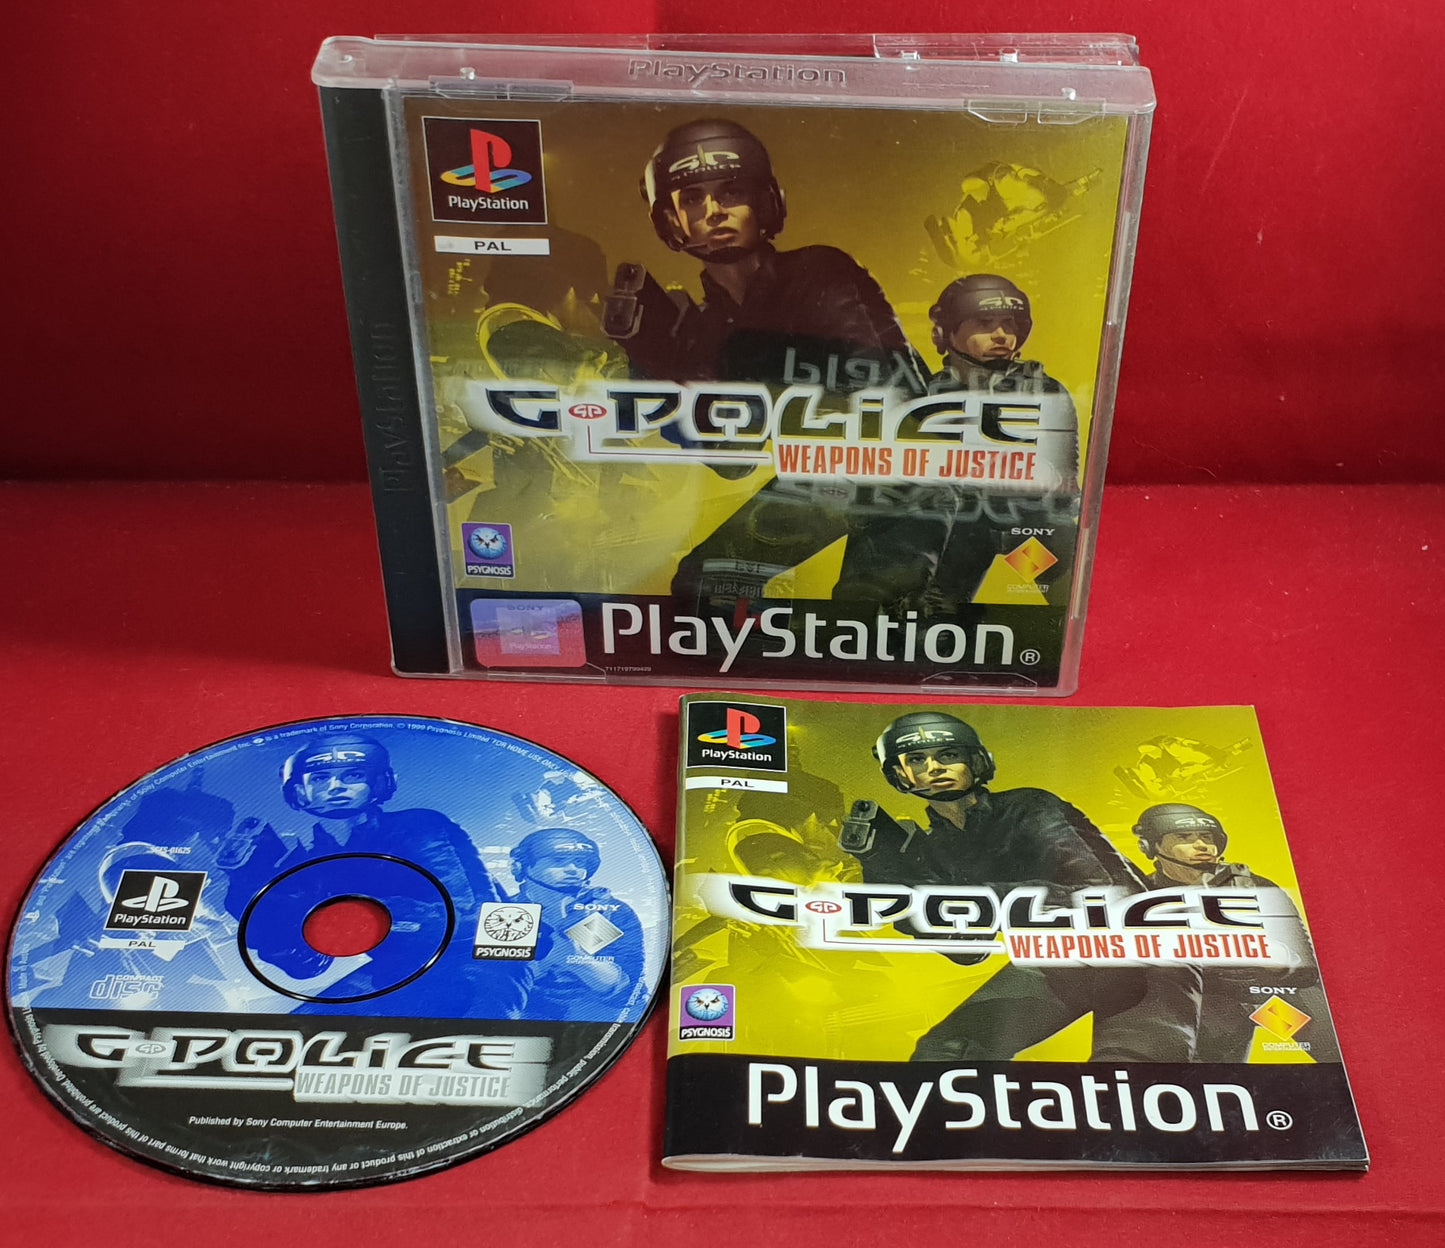 G-Police Weapons of Justice Sony Playstation 1 (PS1) Game